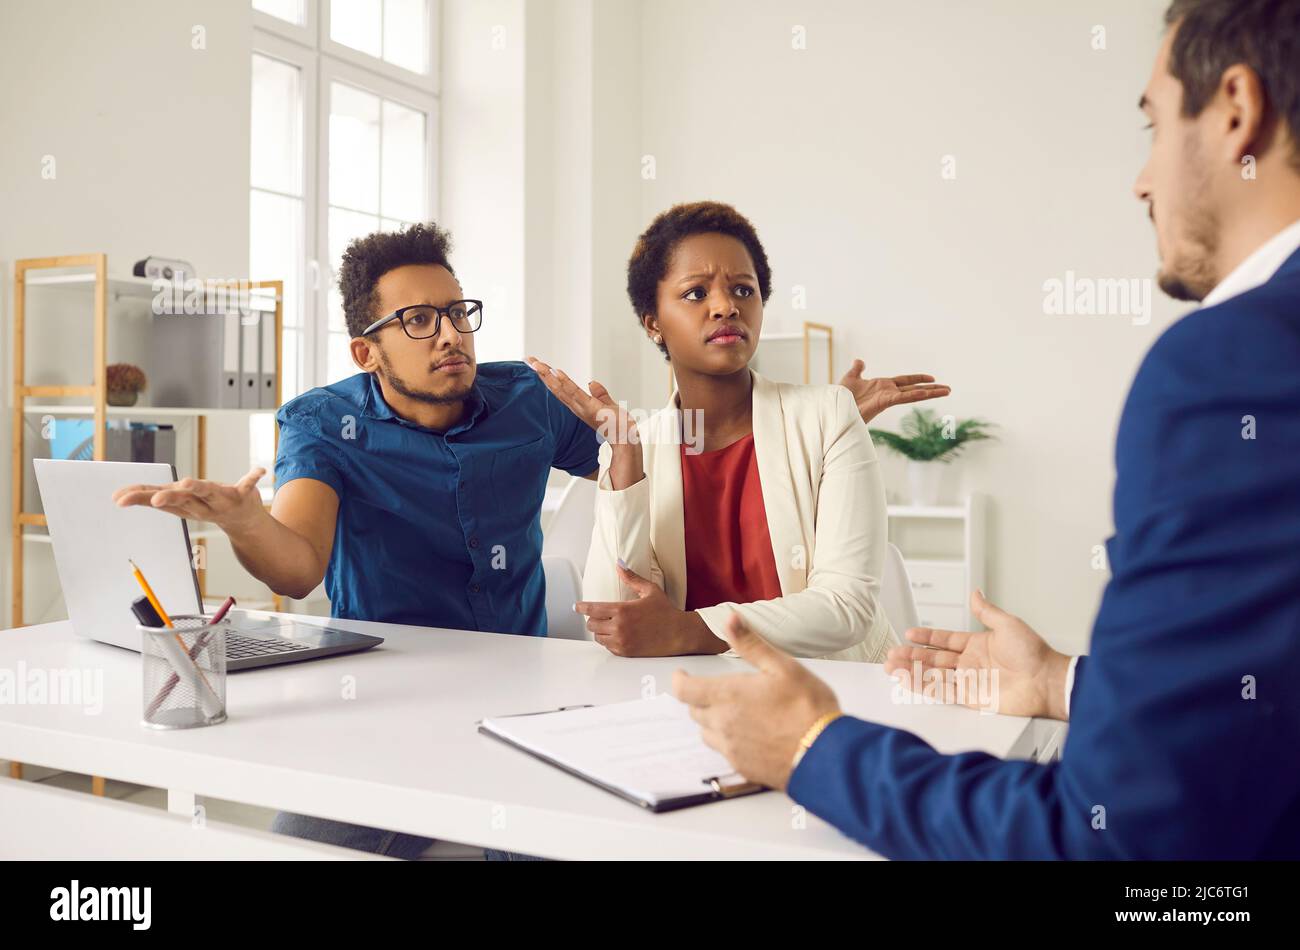 Angry confused clients having misunderstanding with manager and demanding explanation Stock Photo